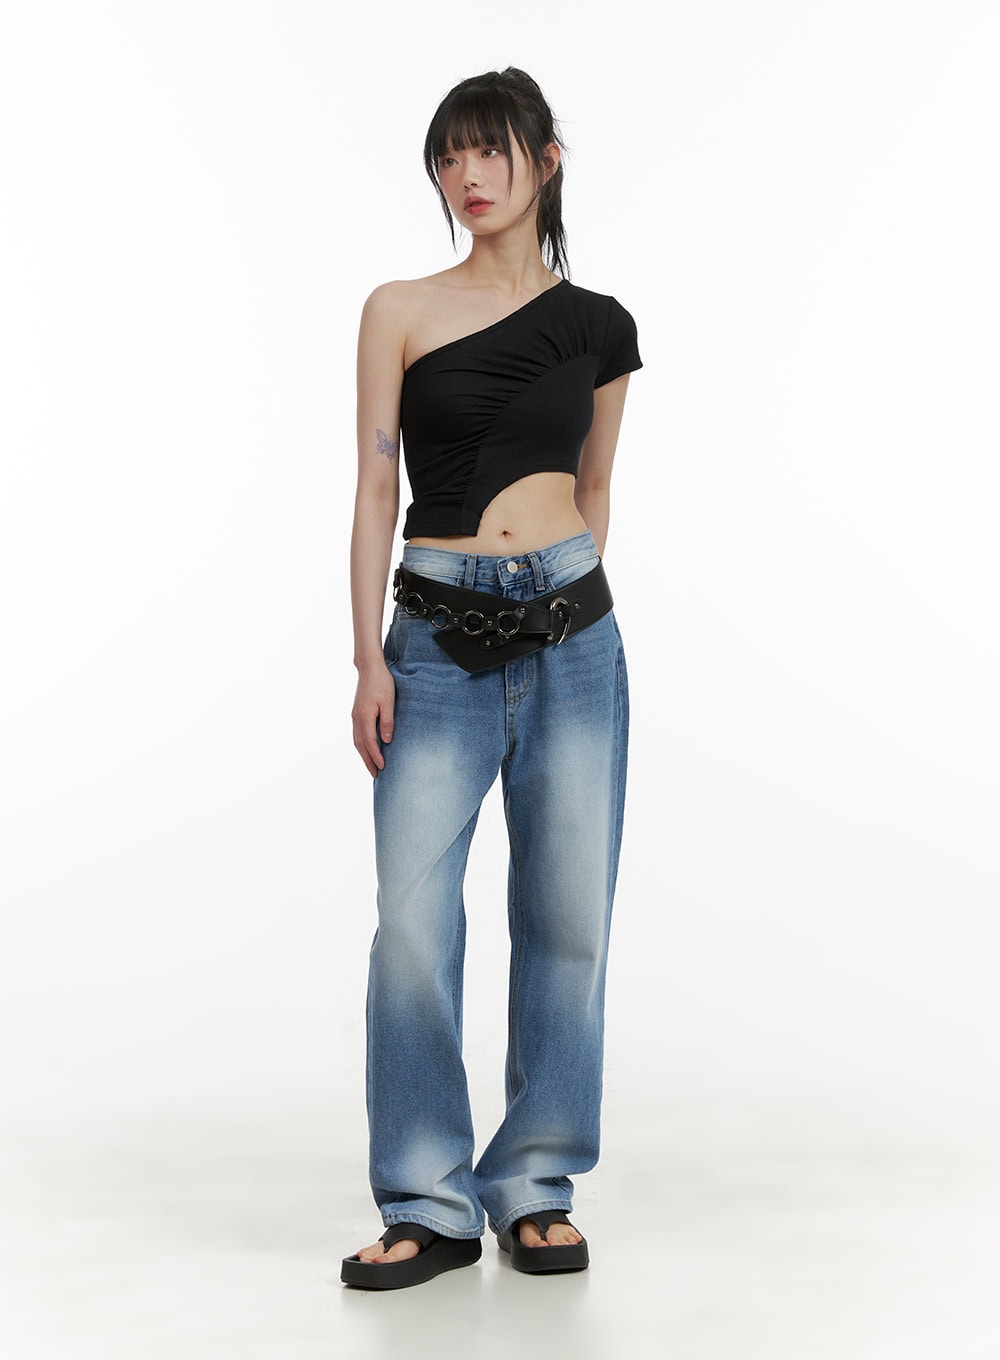 solid-baggy-jeans-cu410